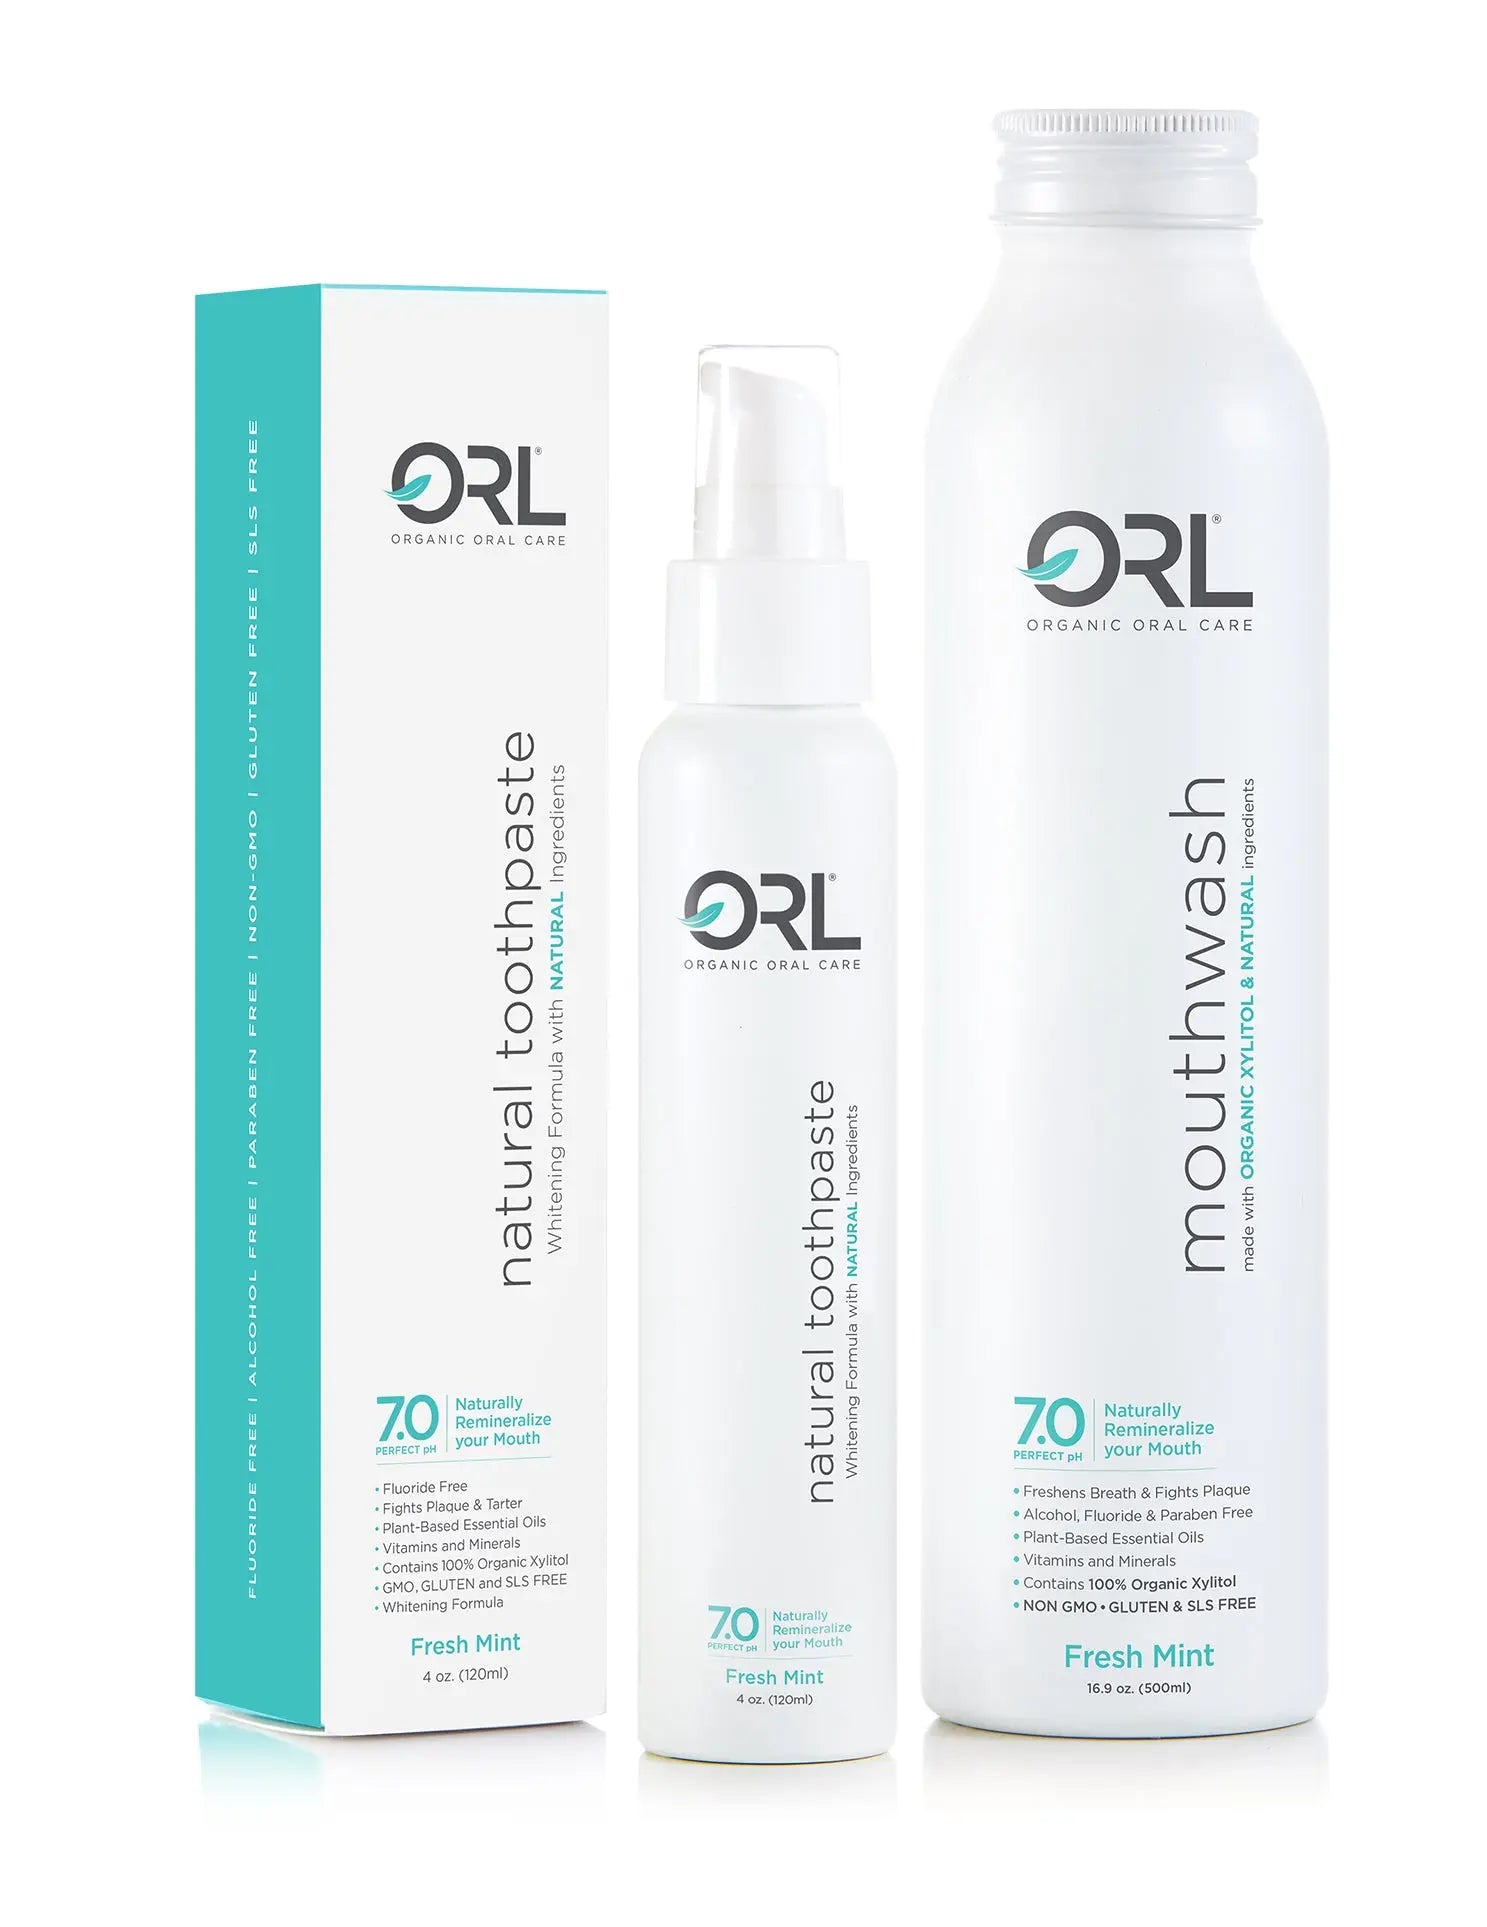 ORL Toothpaste & Mouthwash Bundles | Eco-friendly Aluminum Packaging